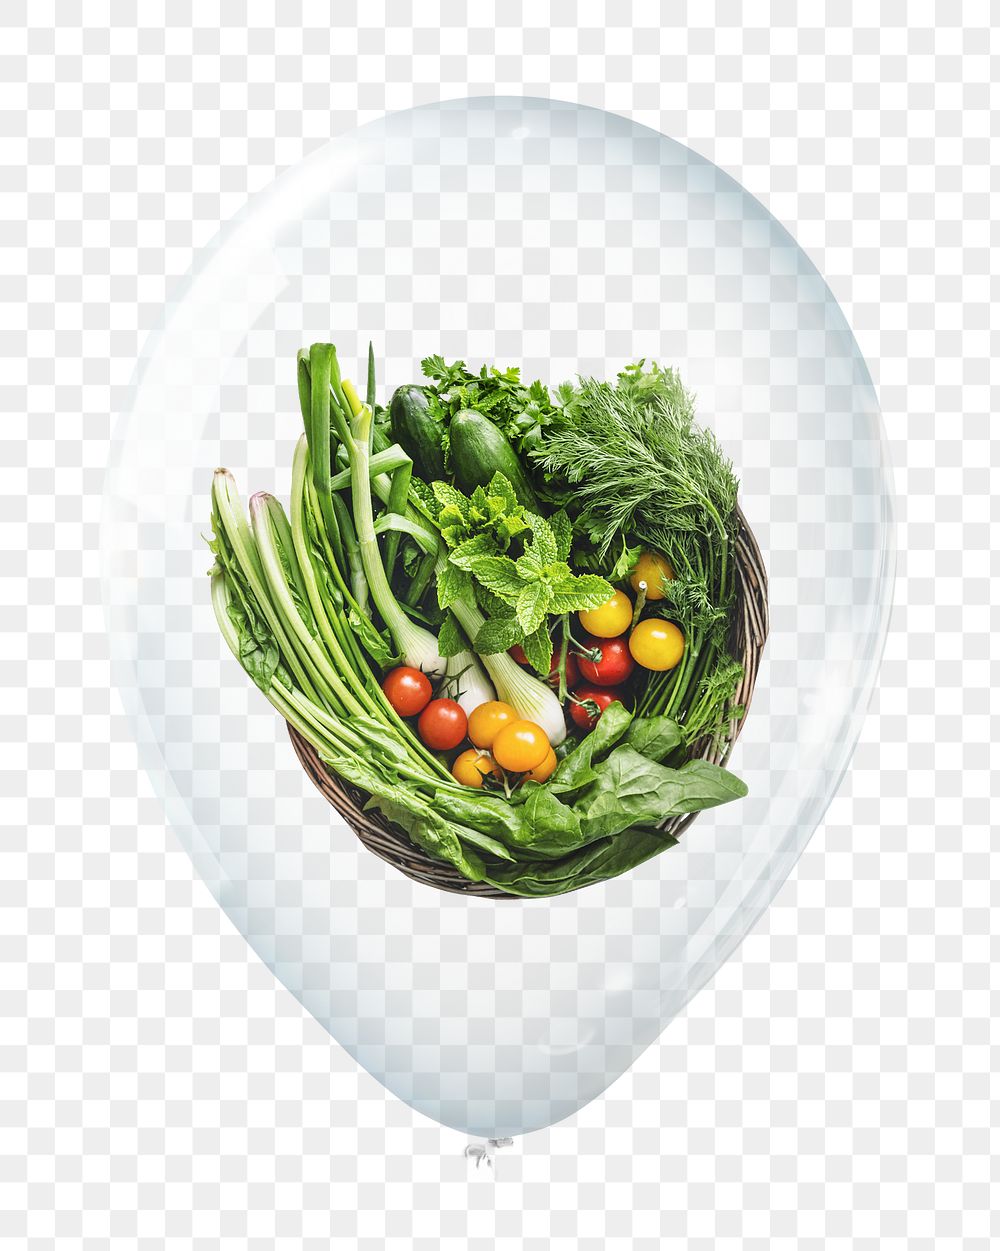 Vegetables png sticker, food in clear balloon, collage element, transparent background